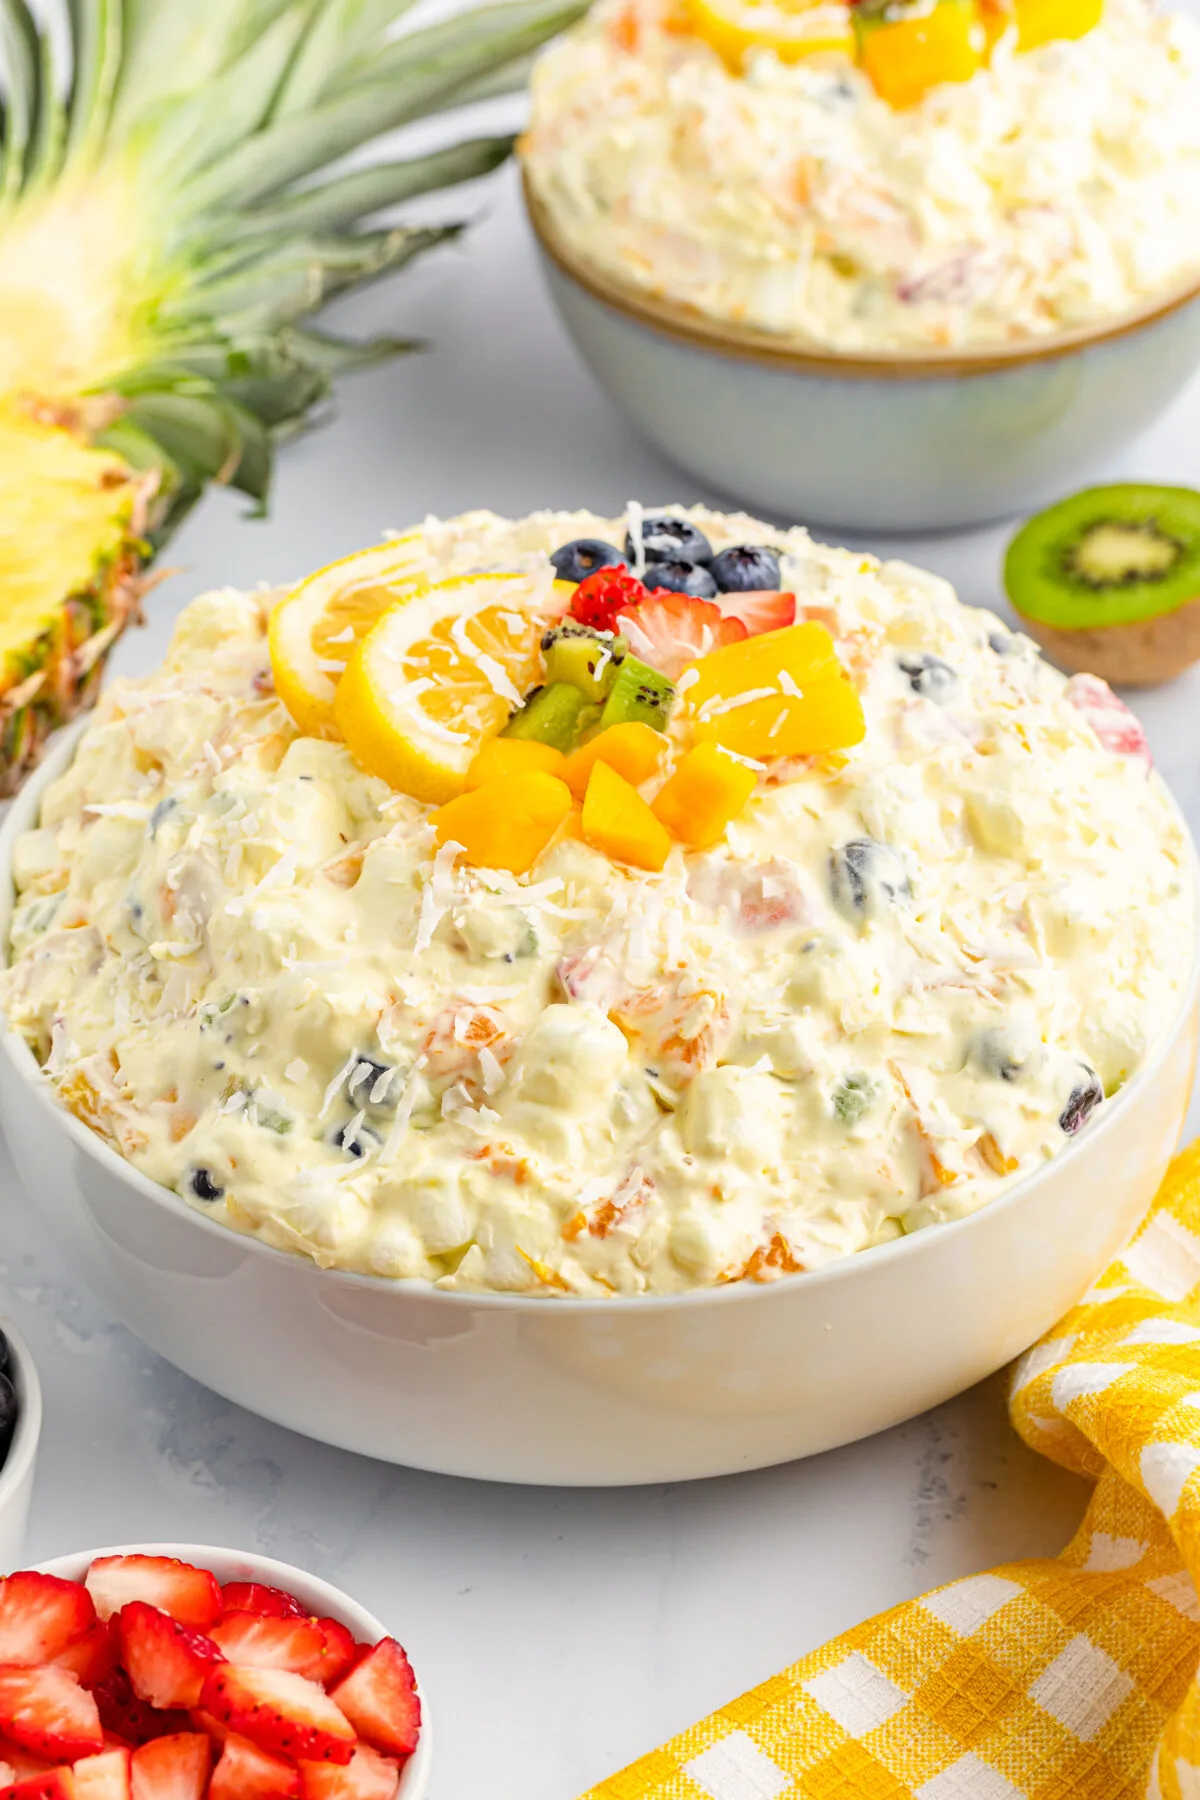 Packed full of island flavours, our easy tropical fruit fluff salad recipe is a perfect dessert or side dish for any occasion!